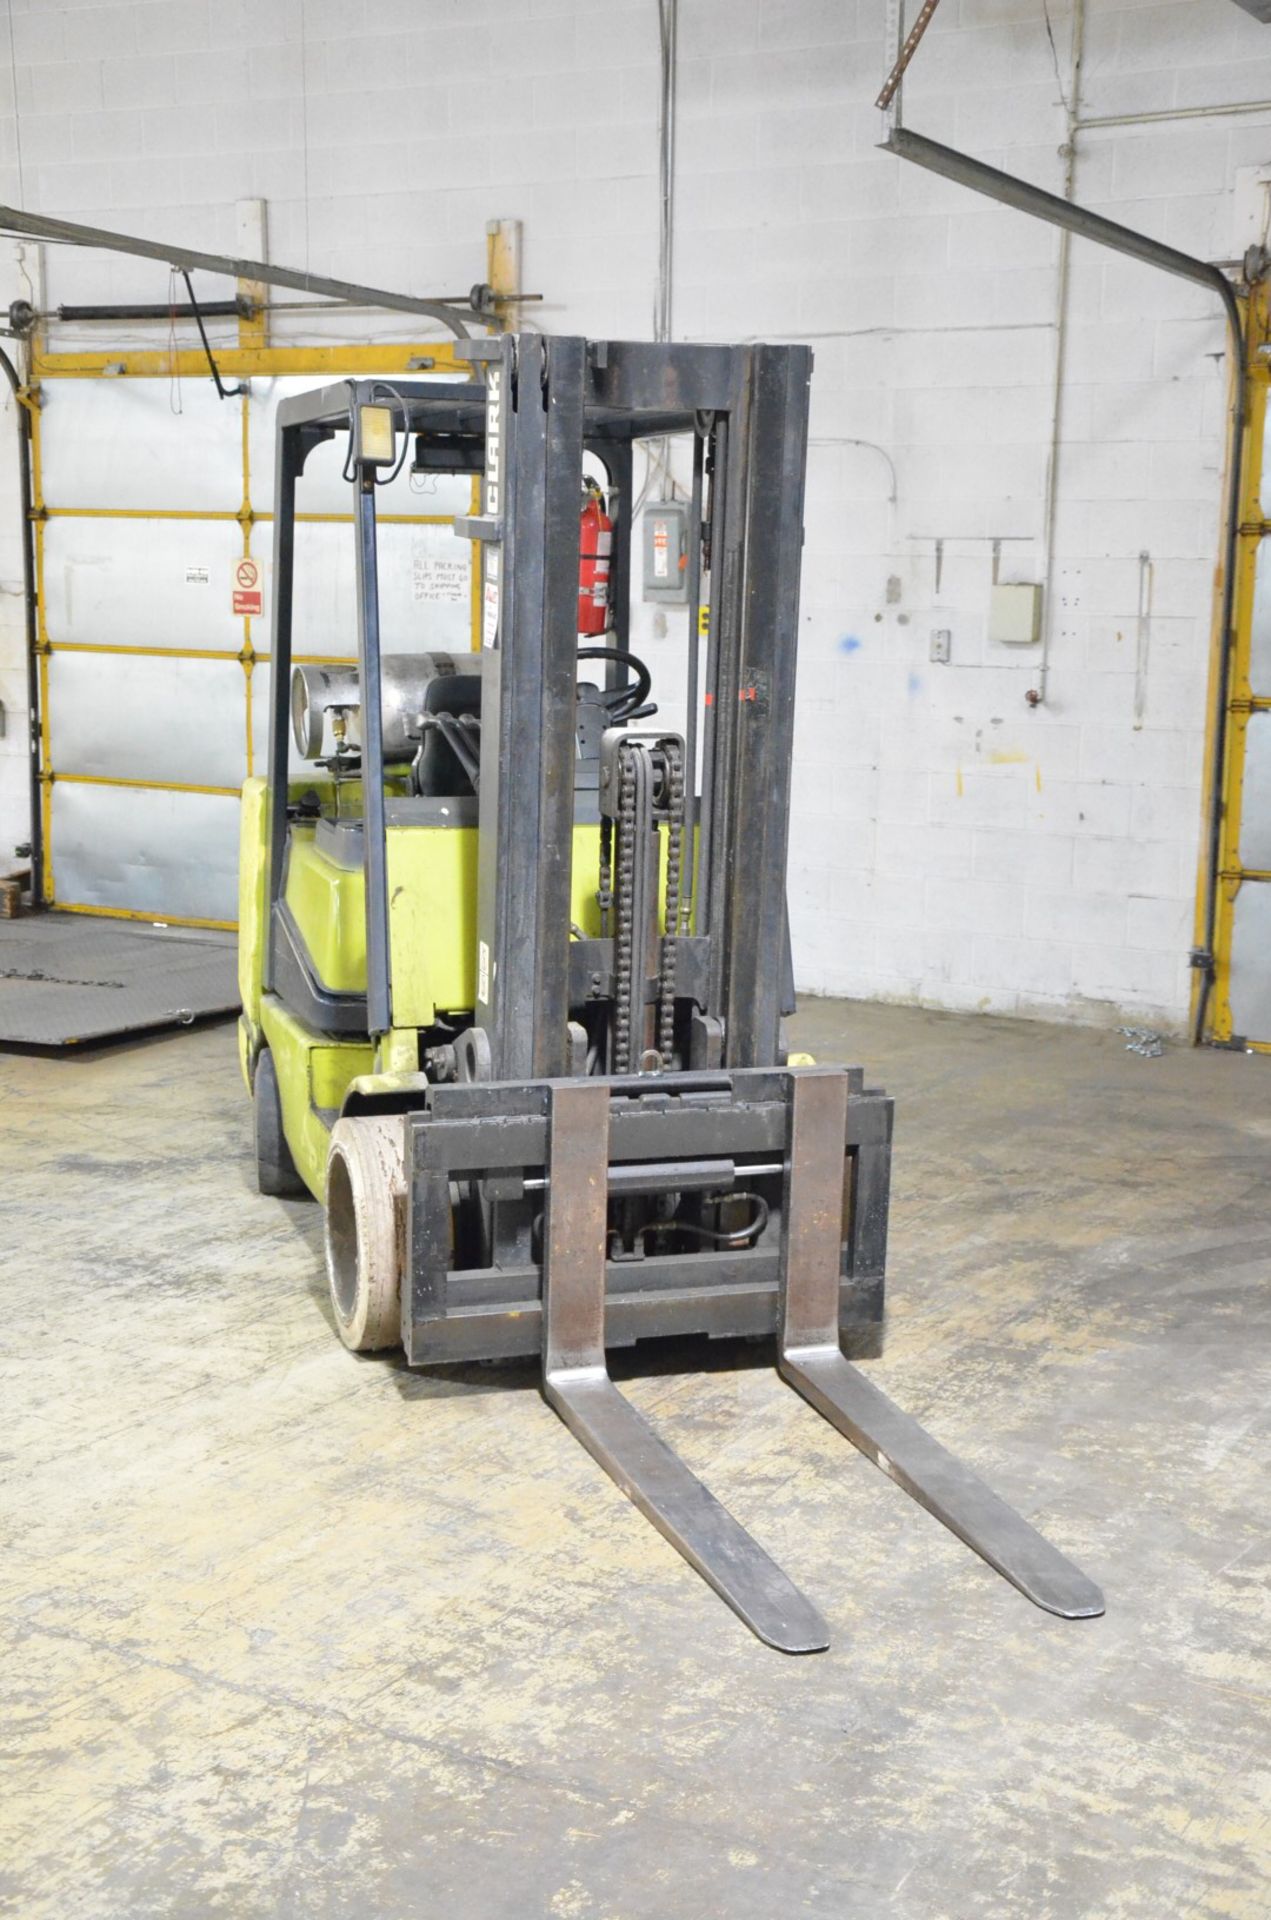 CLARK CGC32 5,900 LB. CAPACITY LPG FORKLIFT WITH 189" MAX. LIFT HEIGHT, 2-STAGE MAST, SIDE SHIFT, - Image 5 of 7